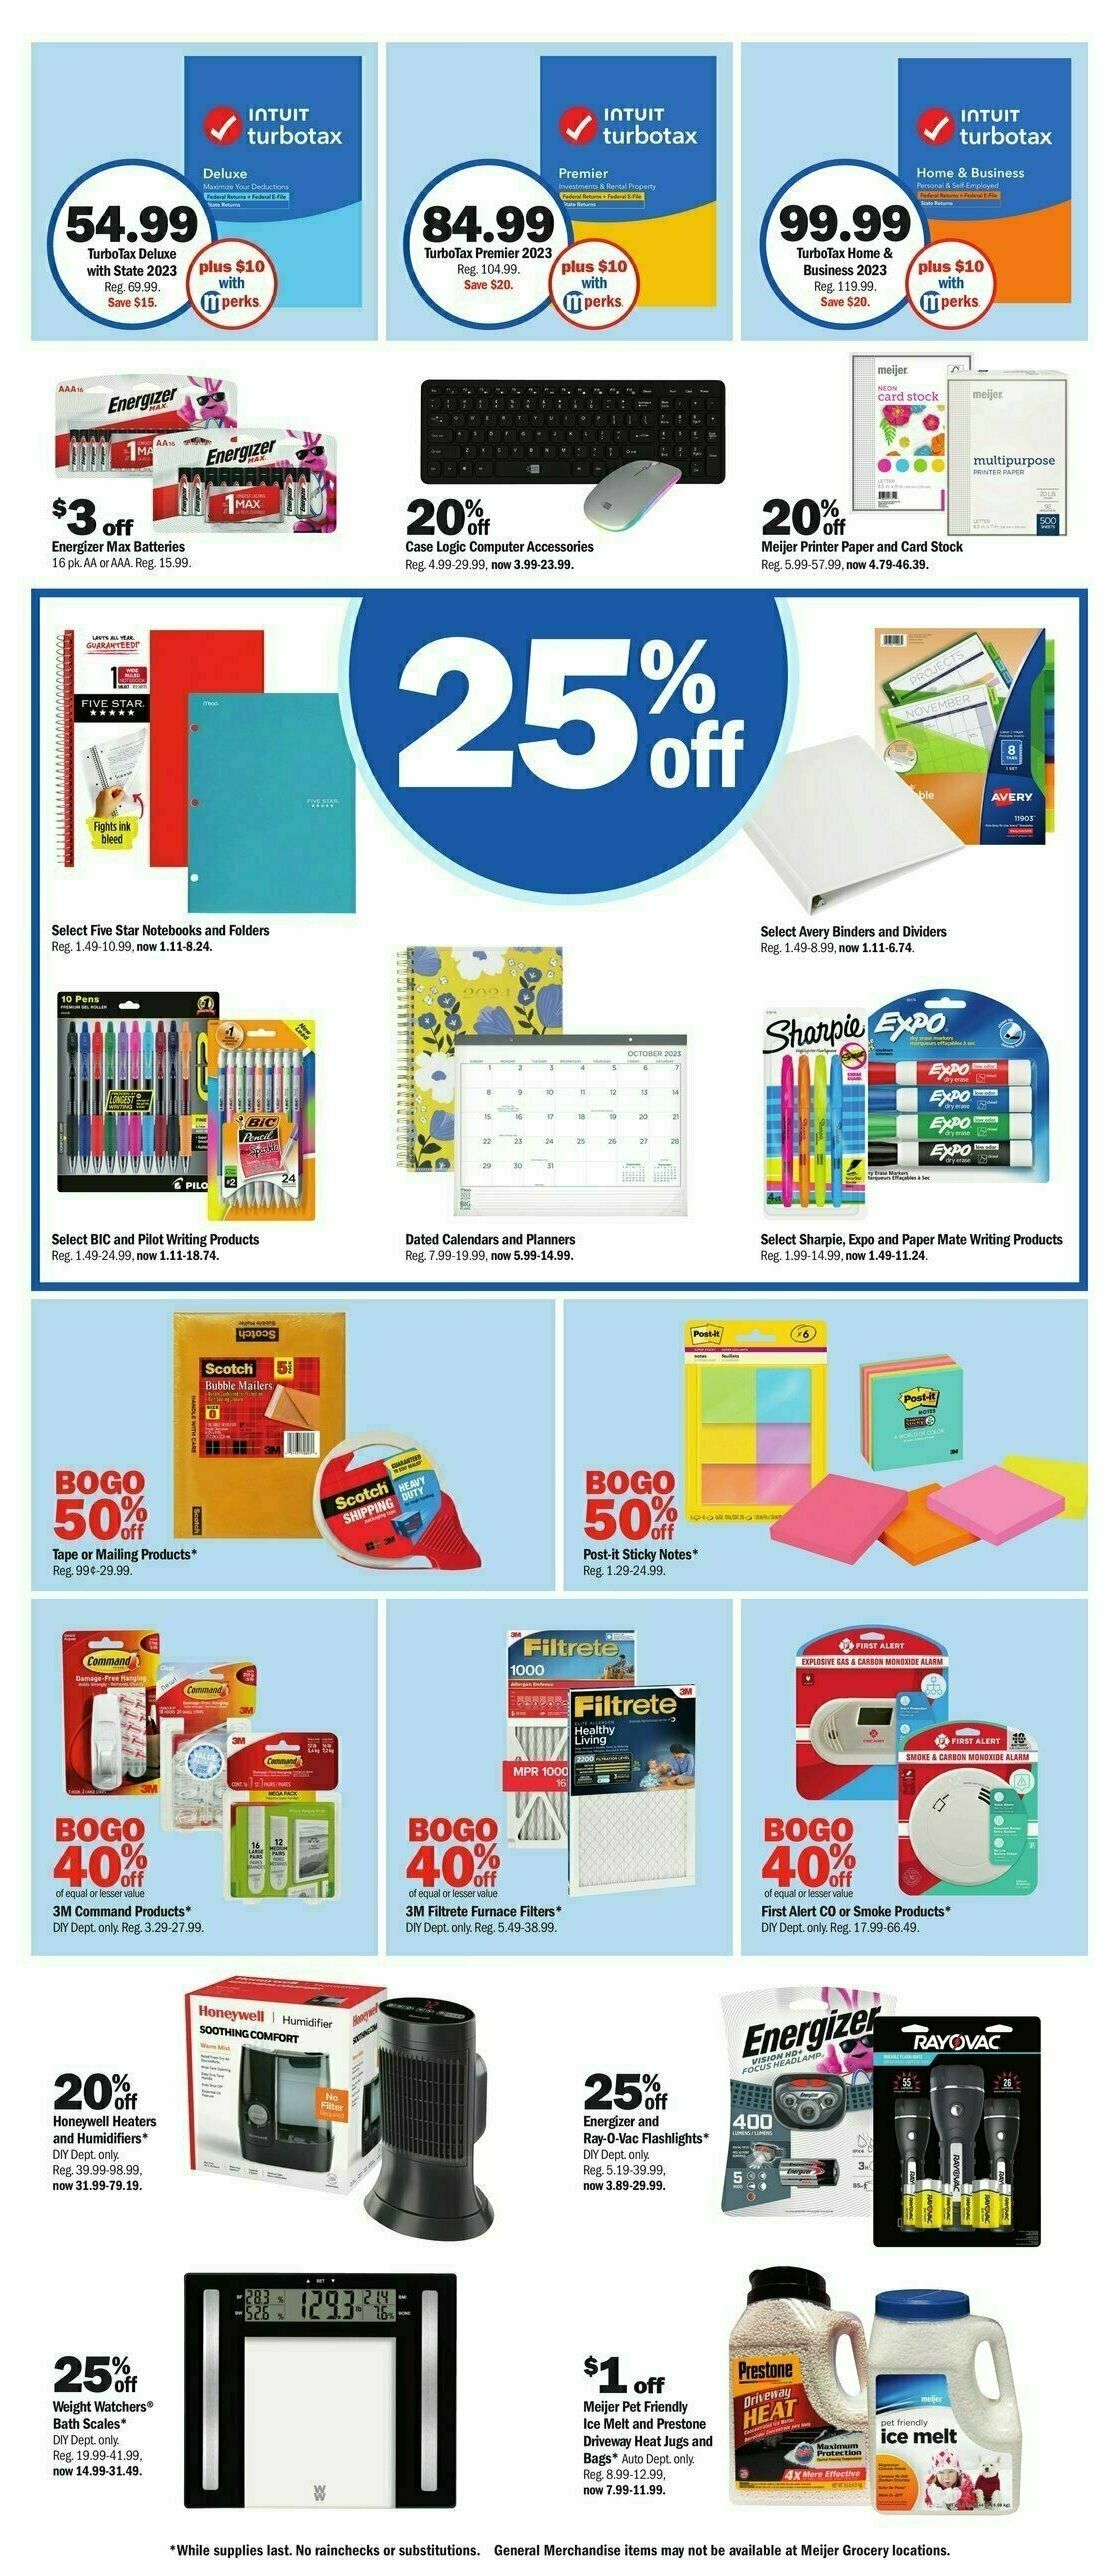 Meijer Weekly Ad from January 7